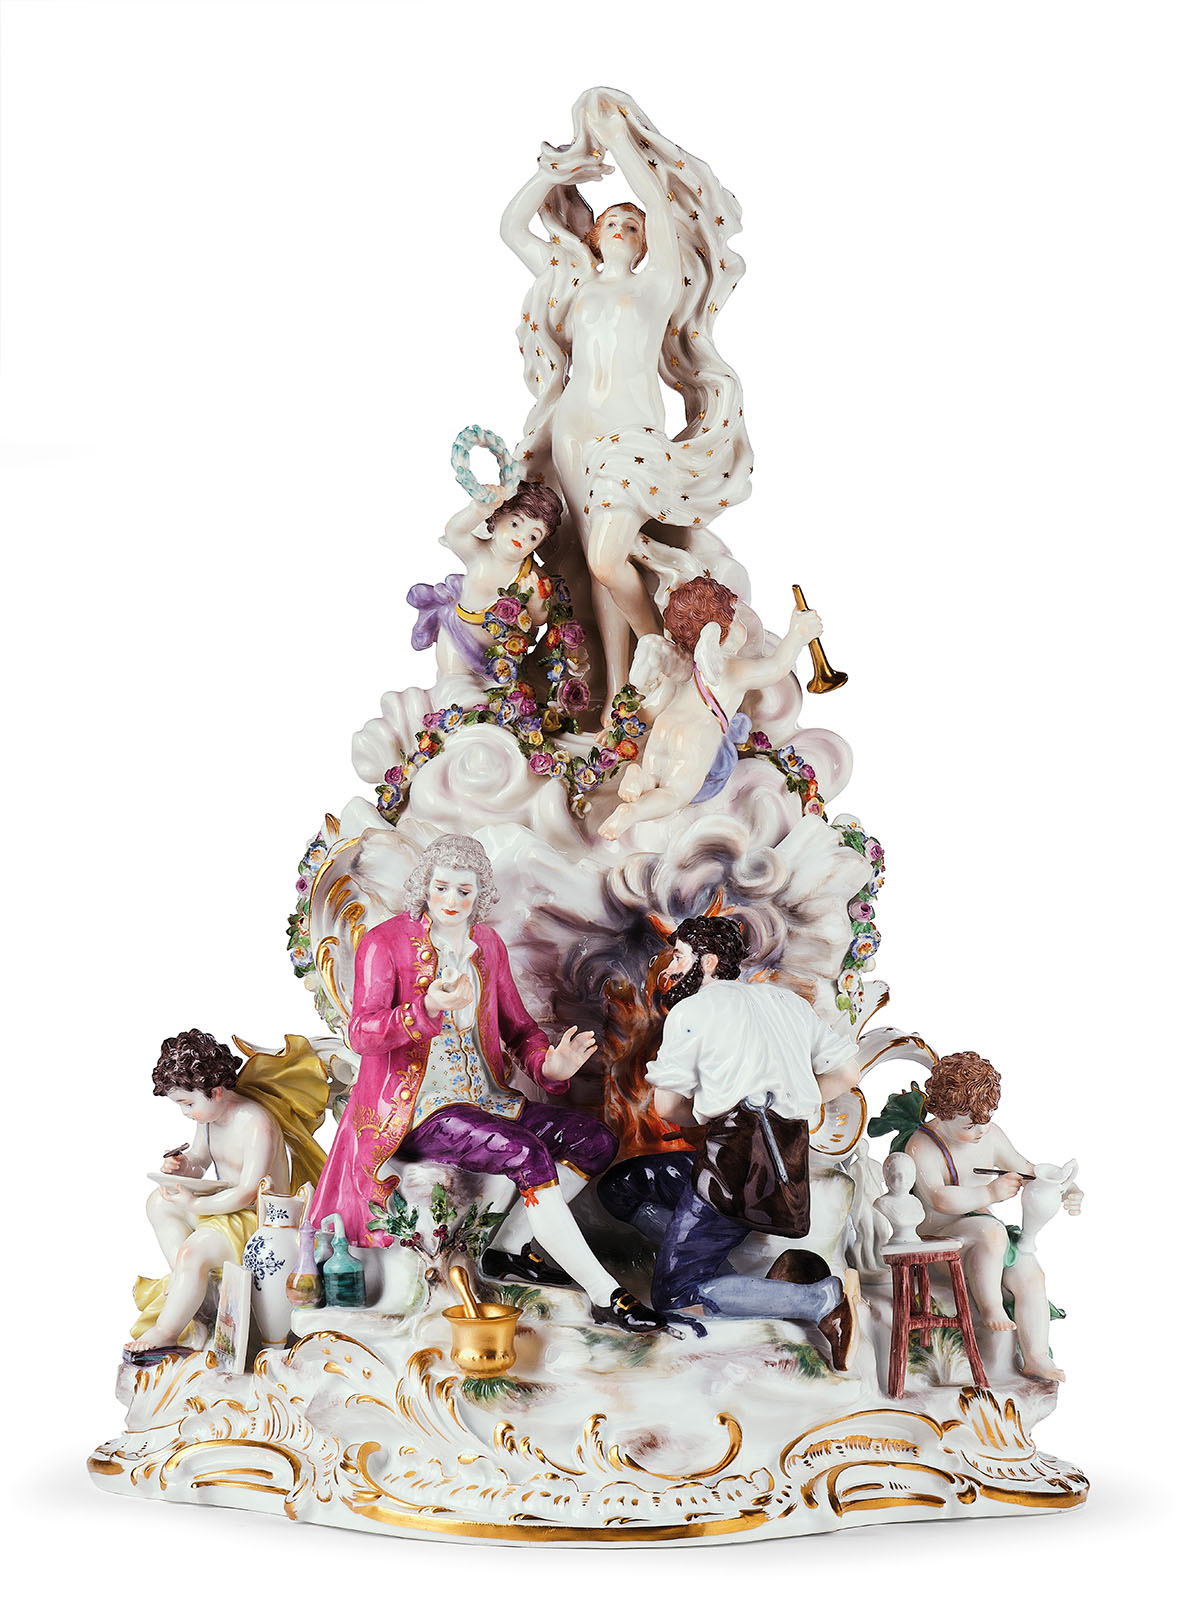 “The Making of Porcelain” - A Very Rare and Historically Important Group of Figures, 2 parts, Meissen, c. 1890, model by Paul Helmig, €36,000 - 50,000